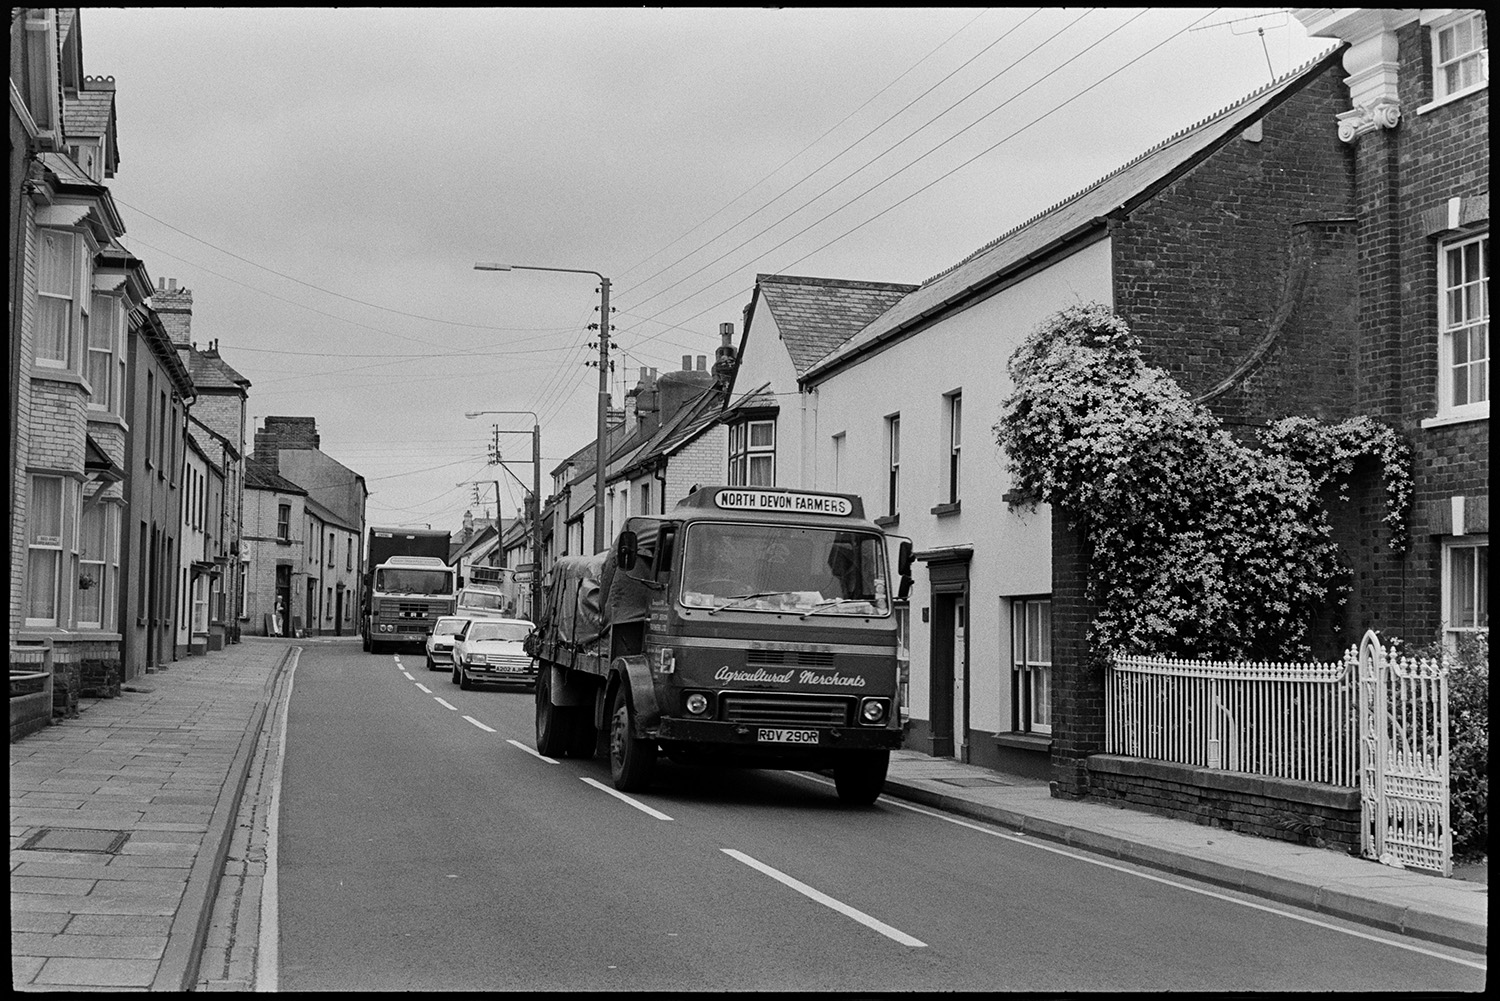 Scenes around town, comparison with old photos, railway line and station, lorries and cars, river.
[Lorries and cars driving through a street in Torrington. A North Devon Farmers lorry is in the foreground next to a building with railings and clematis growing up it.]